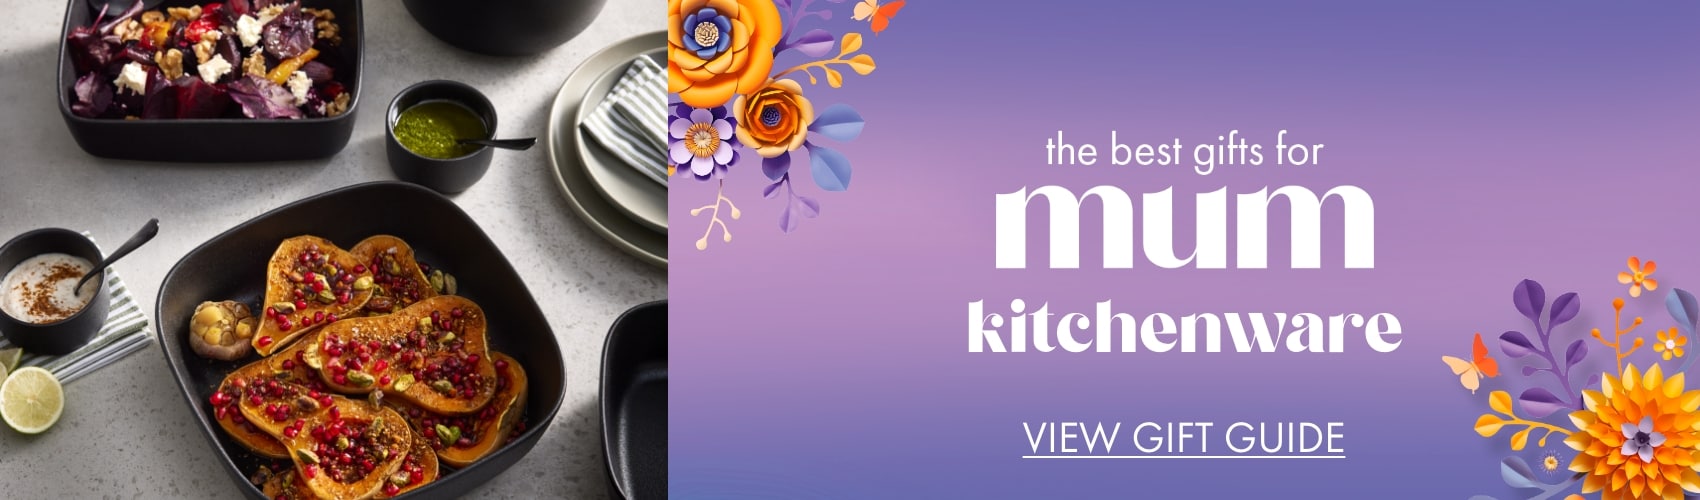 The best gifts for mum - kitchenware